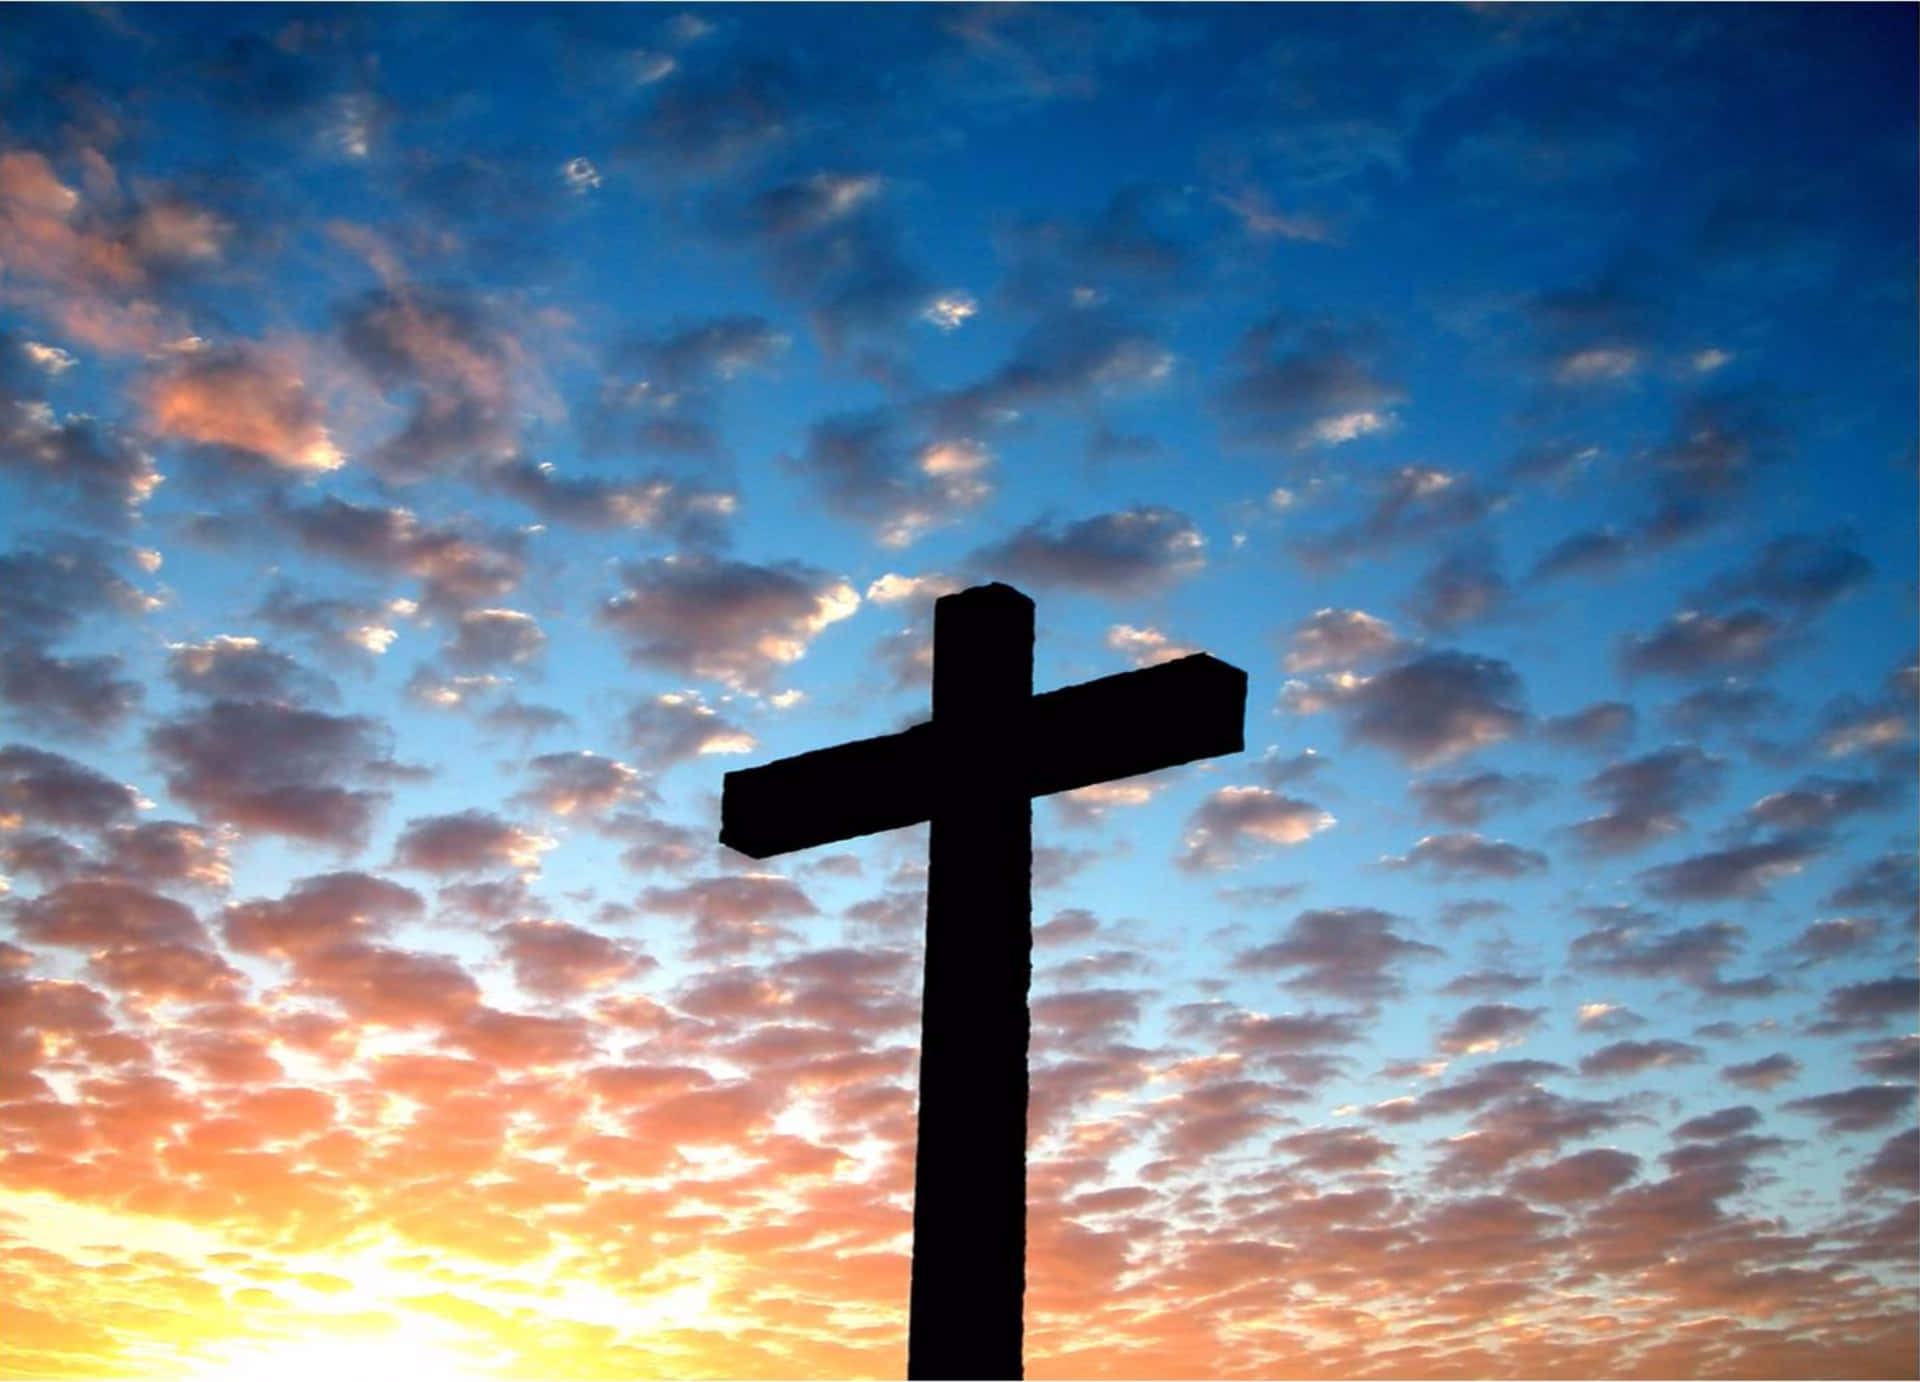 A Cross Is Silhouetted Against A Sunset Sky